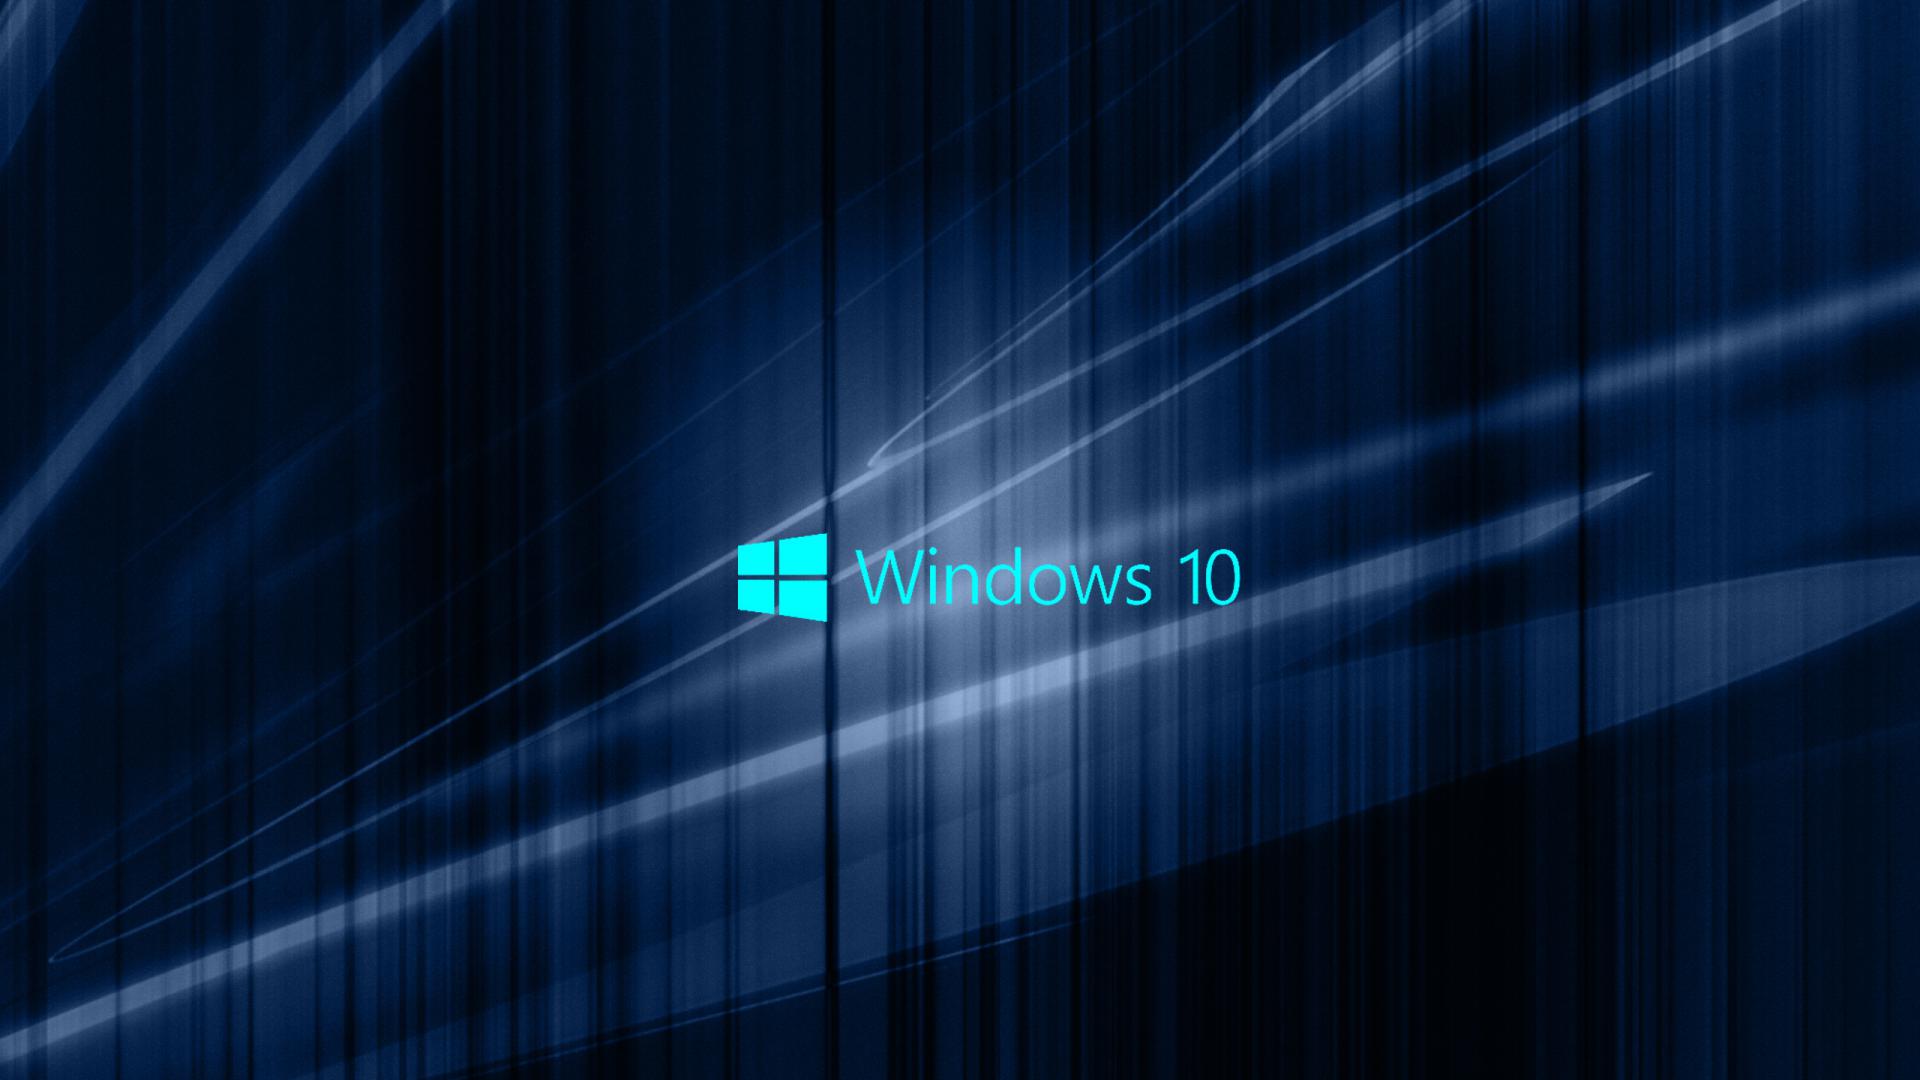 Windows Wallpaper with Blue Abstract Waves HD Wallpapers for Free